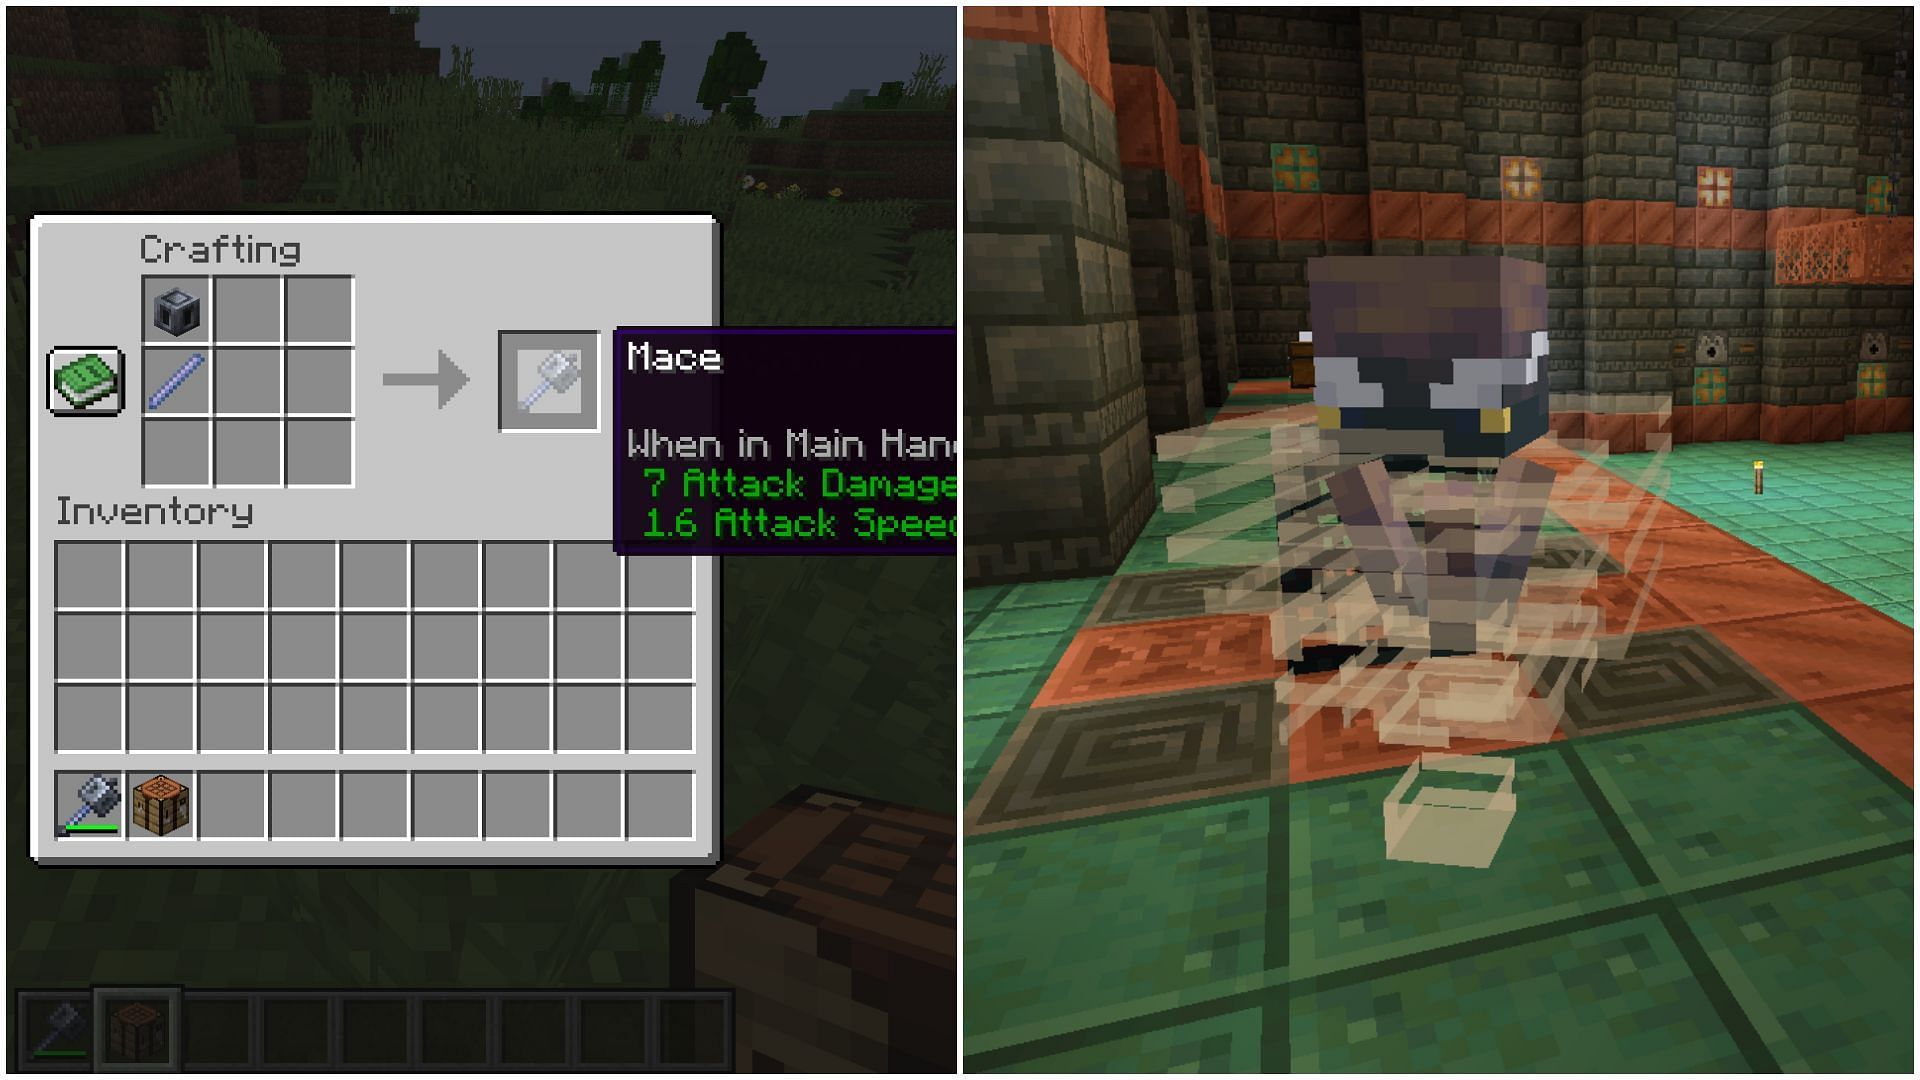 Ways to obtain wind charge and mace in Minecraft (Image via Mojang Studios)